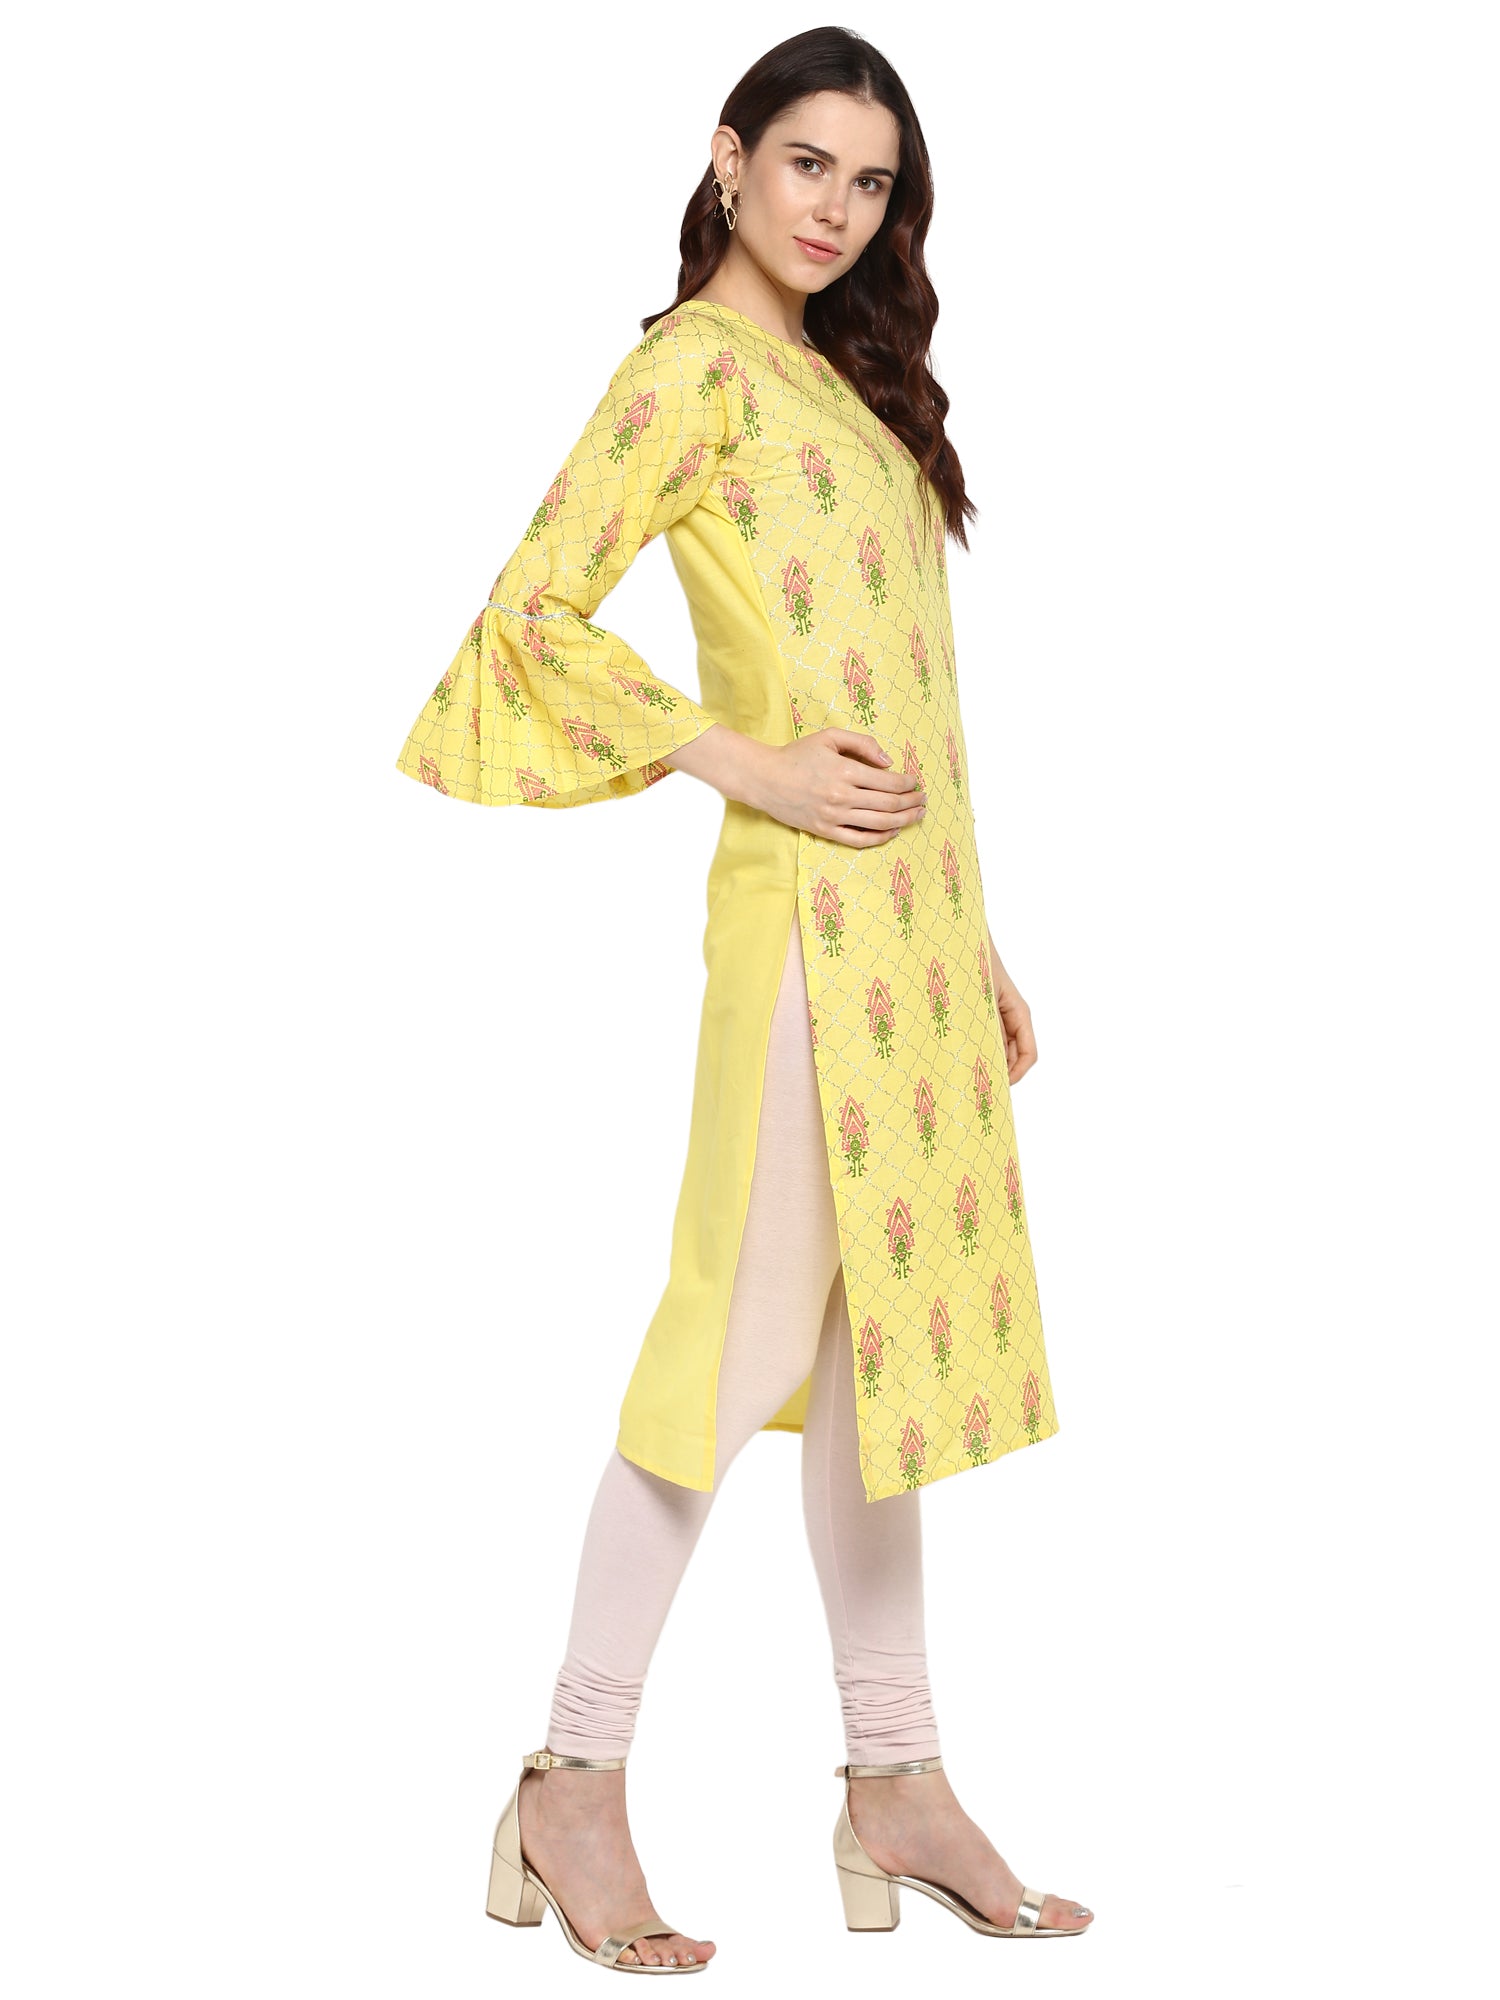 Women's Yellow Cotton Only Kurta With Fit & Flare Sleeves - Ahalyaa